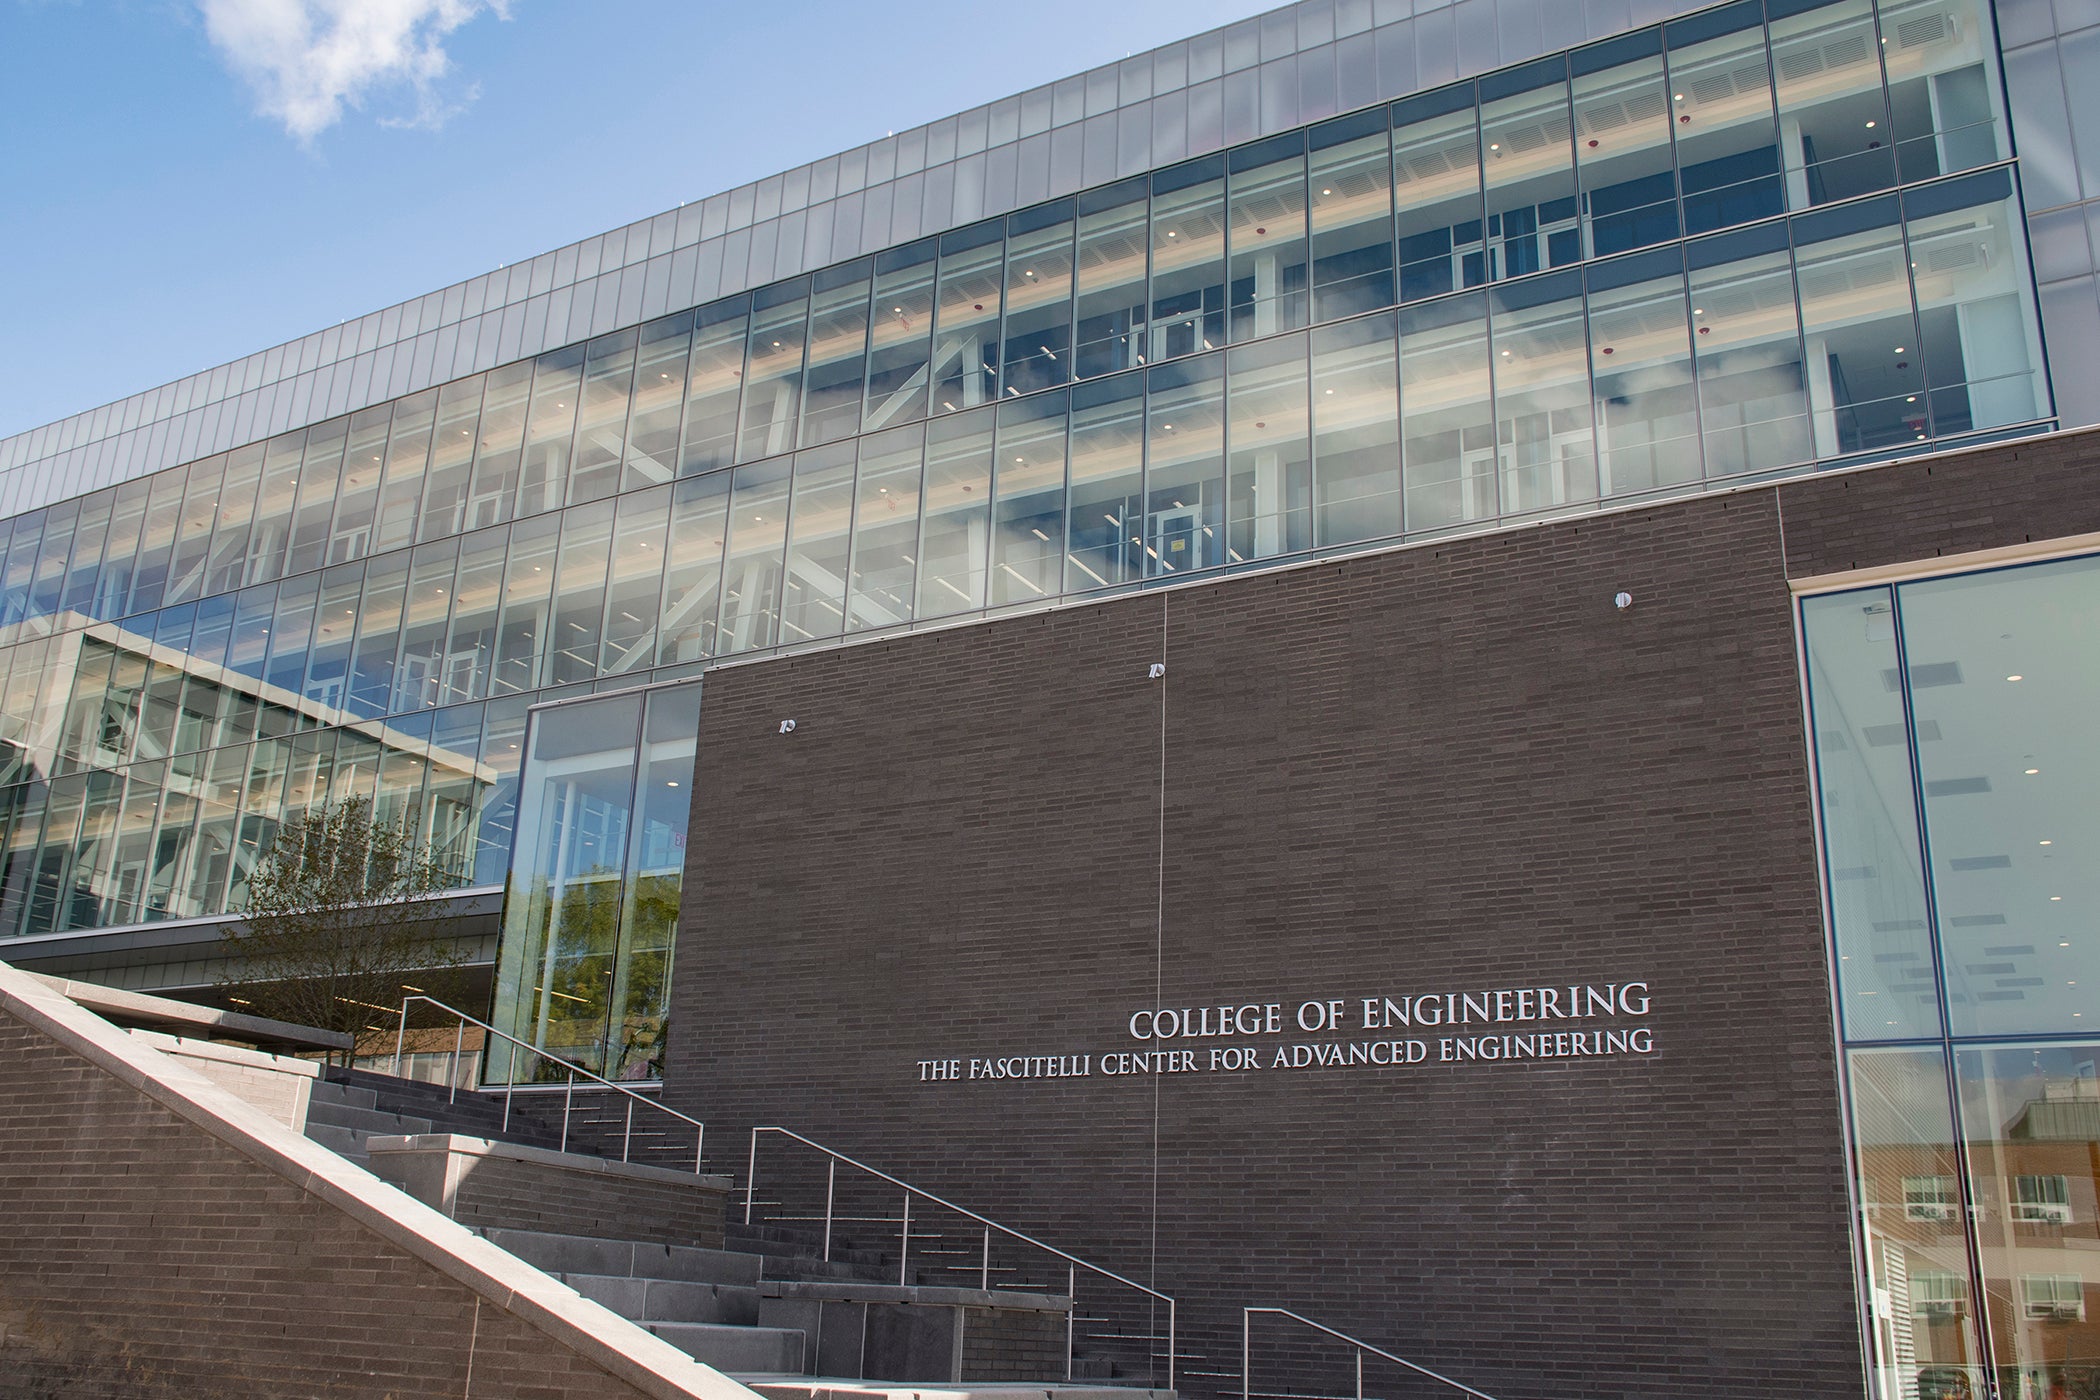 The new Fascitelli Center for Advanced Engineering at the University of Rhode Island (URI Photo/Nora Lewis)